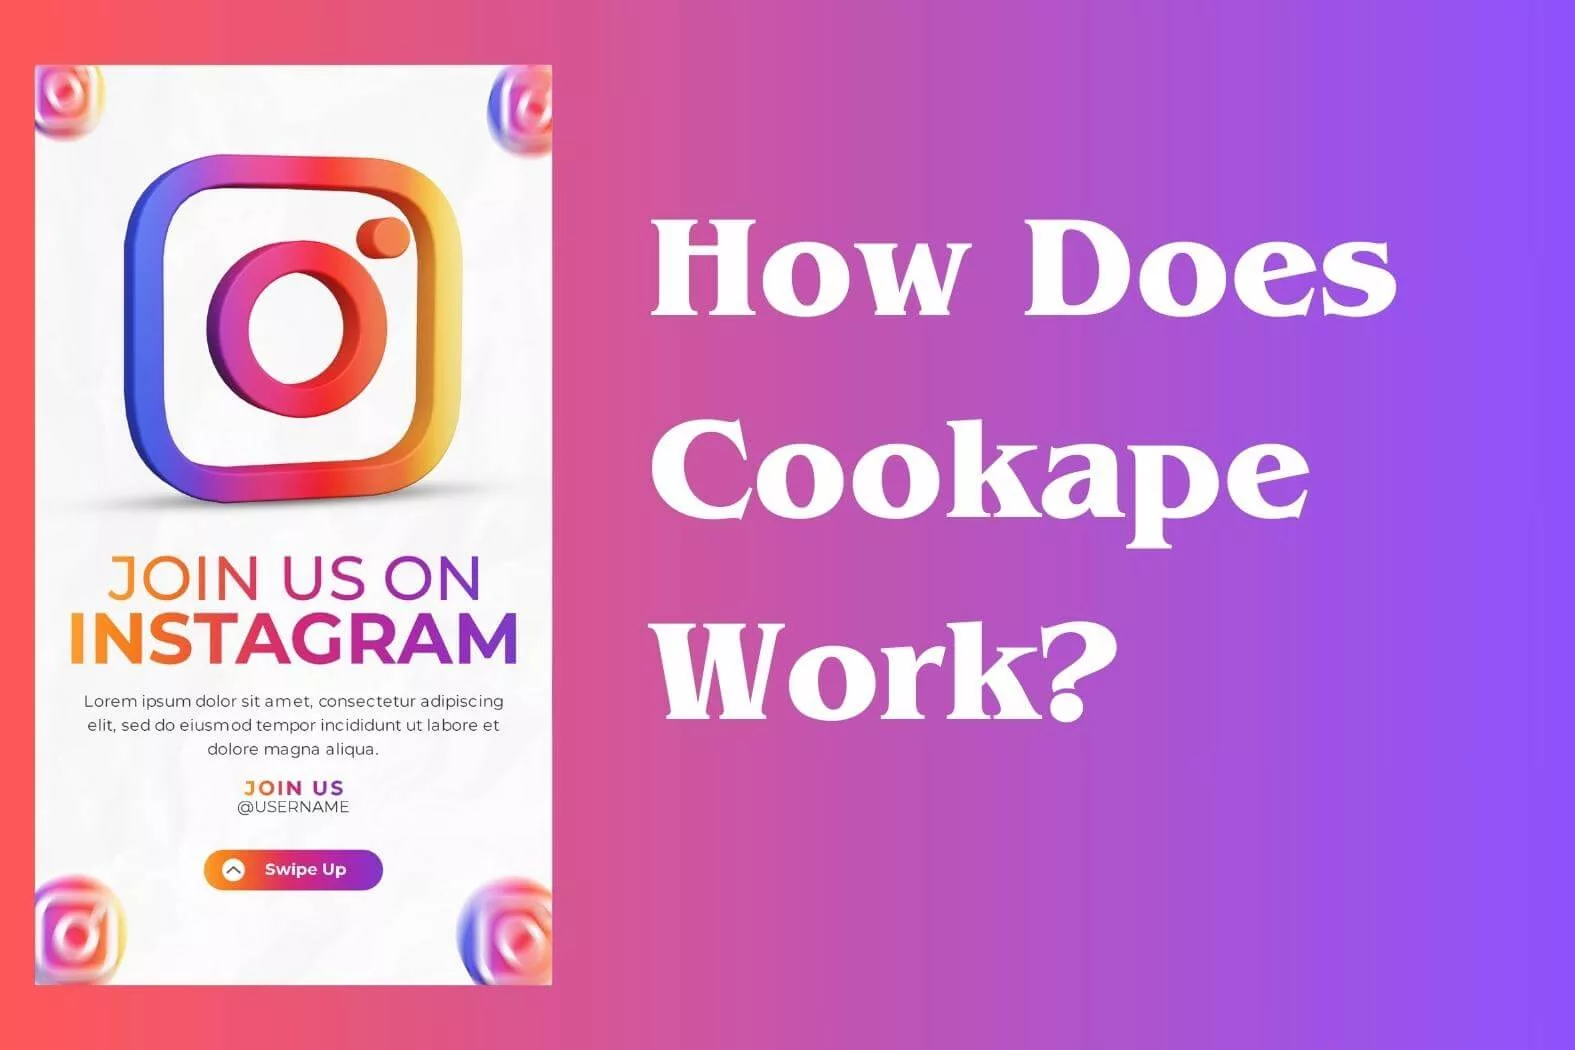 How Does Cookape Work?